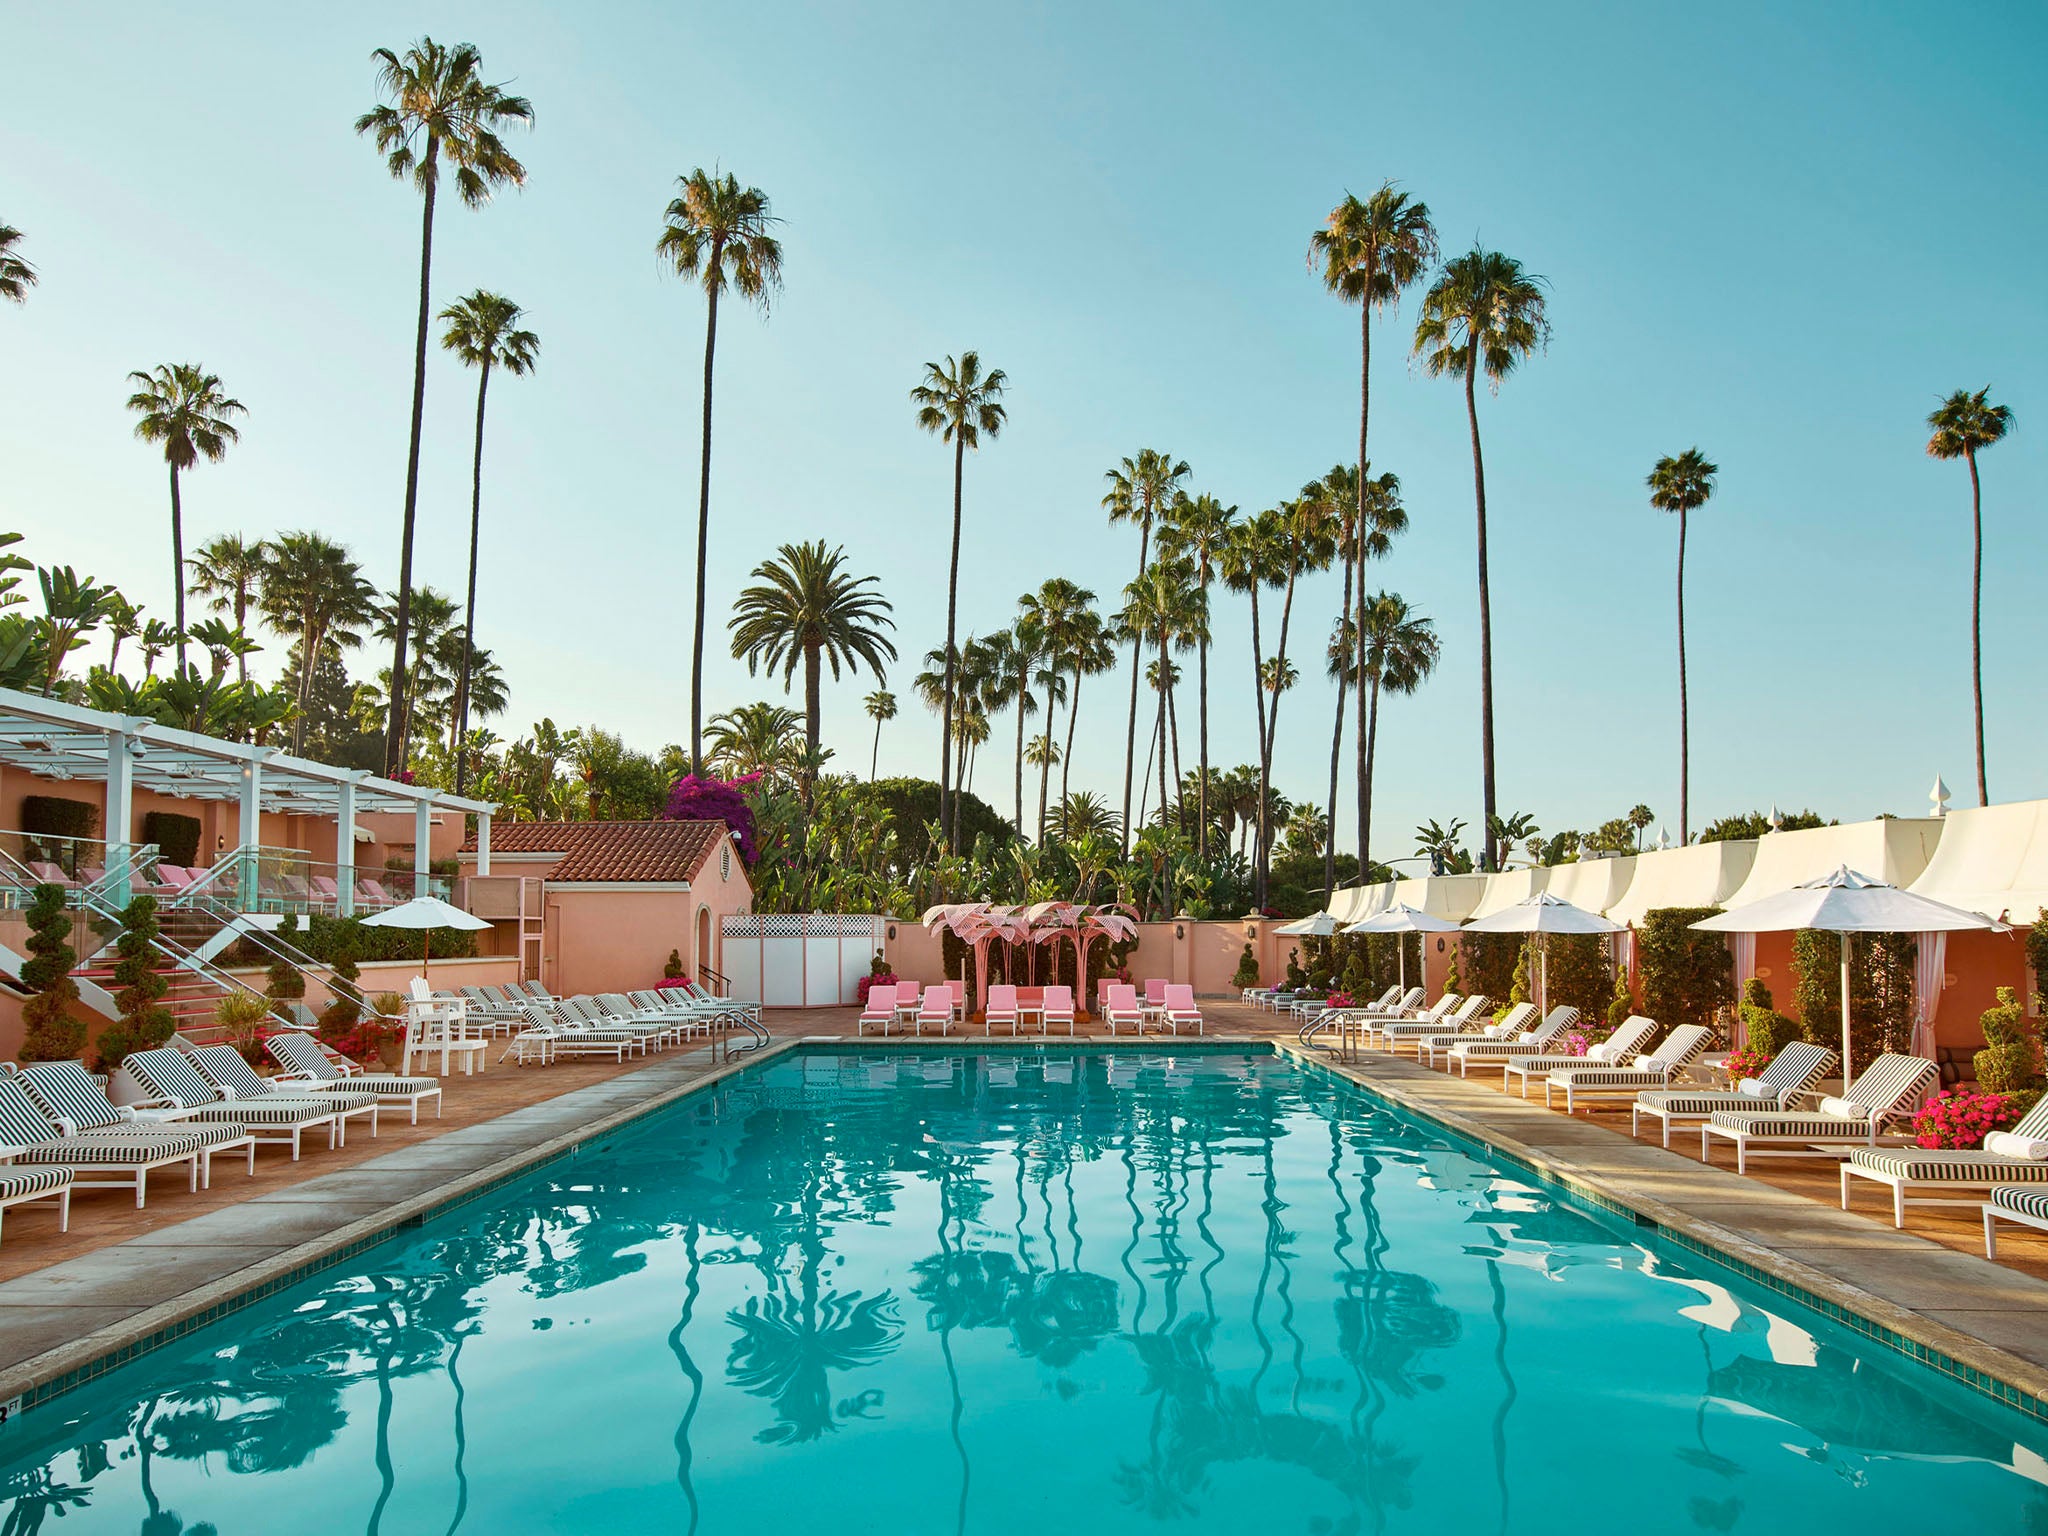 The 13 Best Places for Palaces in Los Angeles